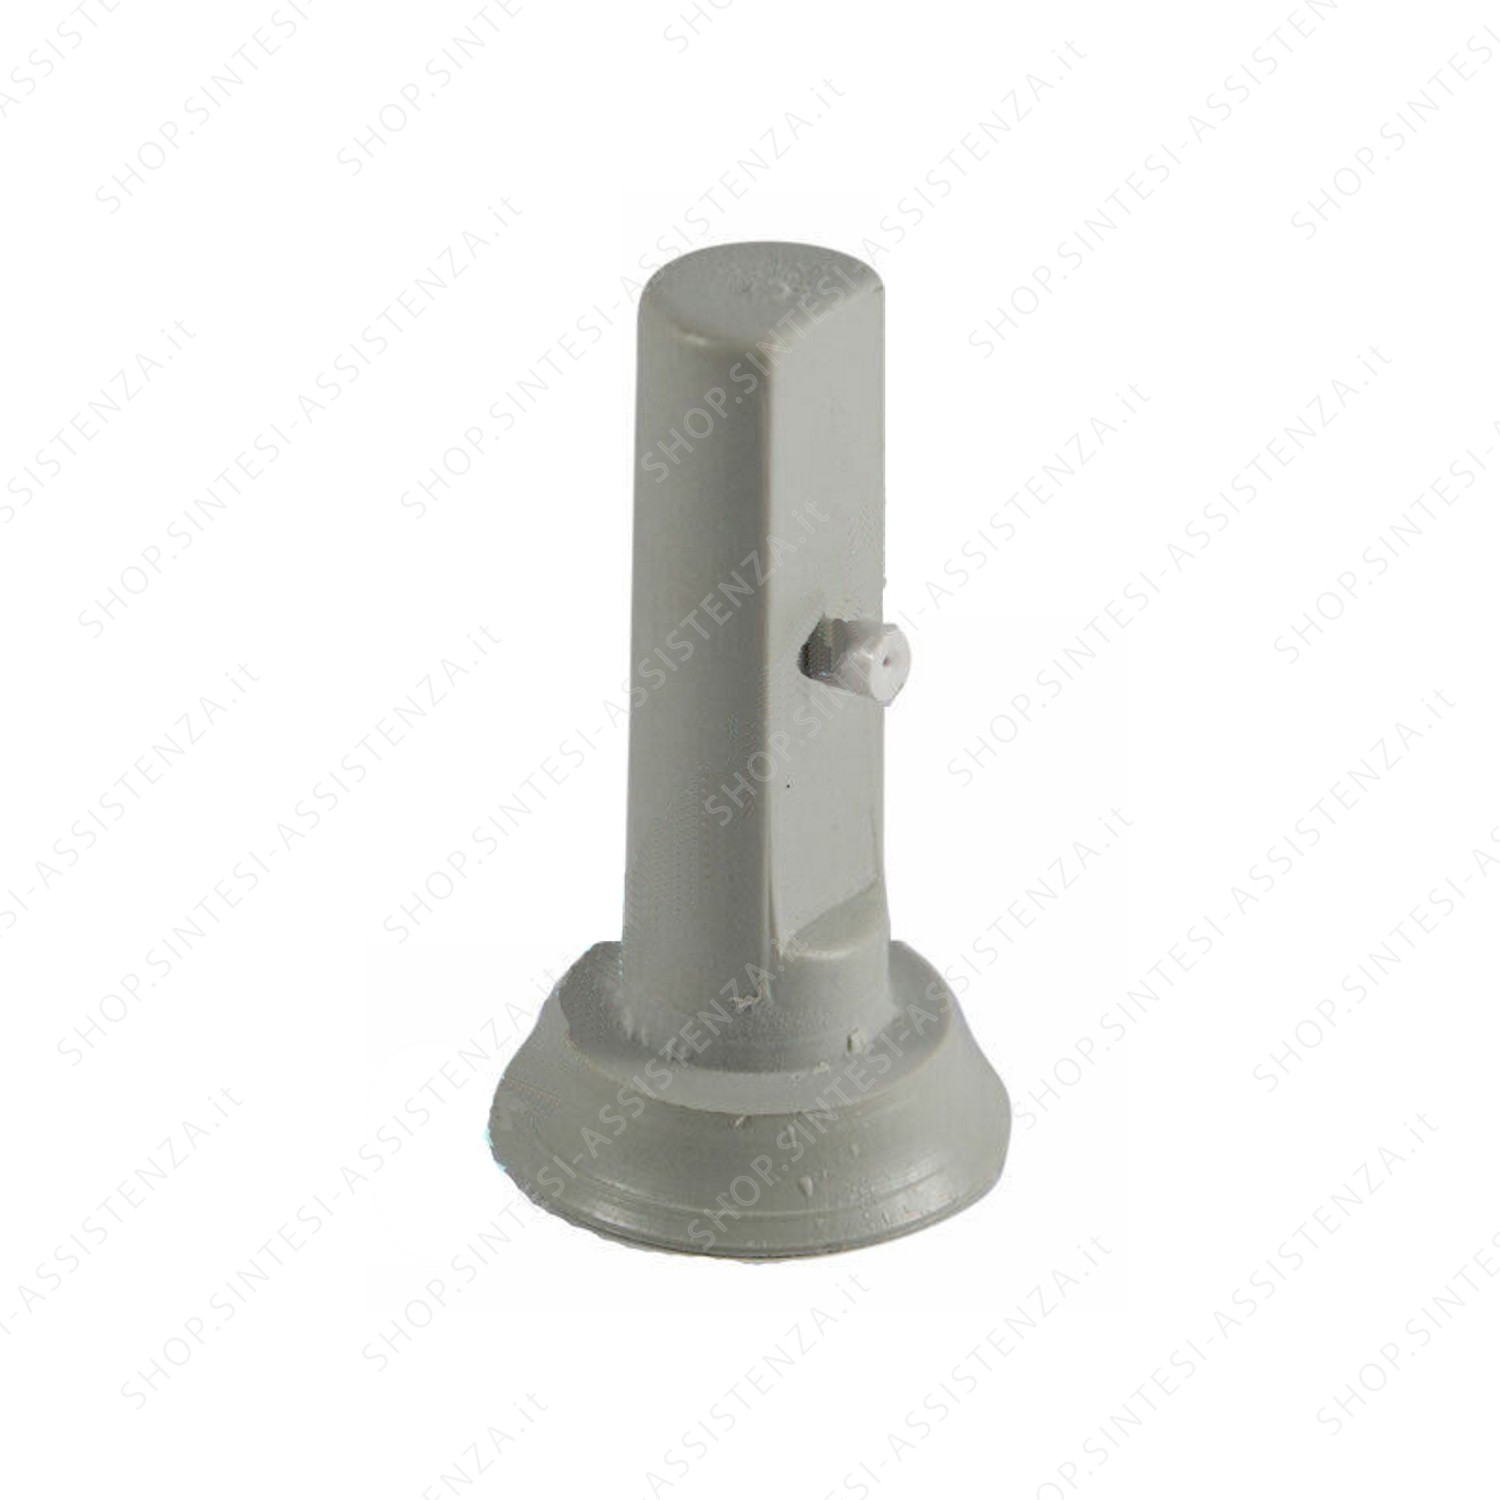 PIN COVER PIN ROBOT CUISILUX BLENDER 3002110013 - 3002110013